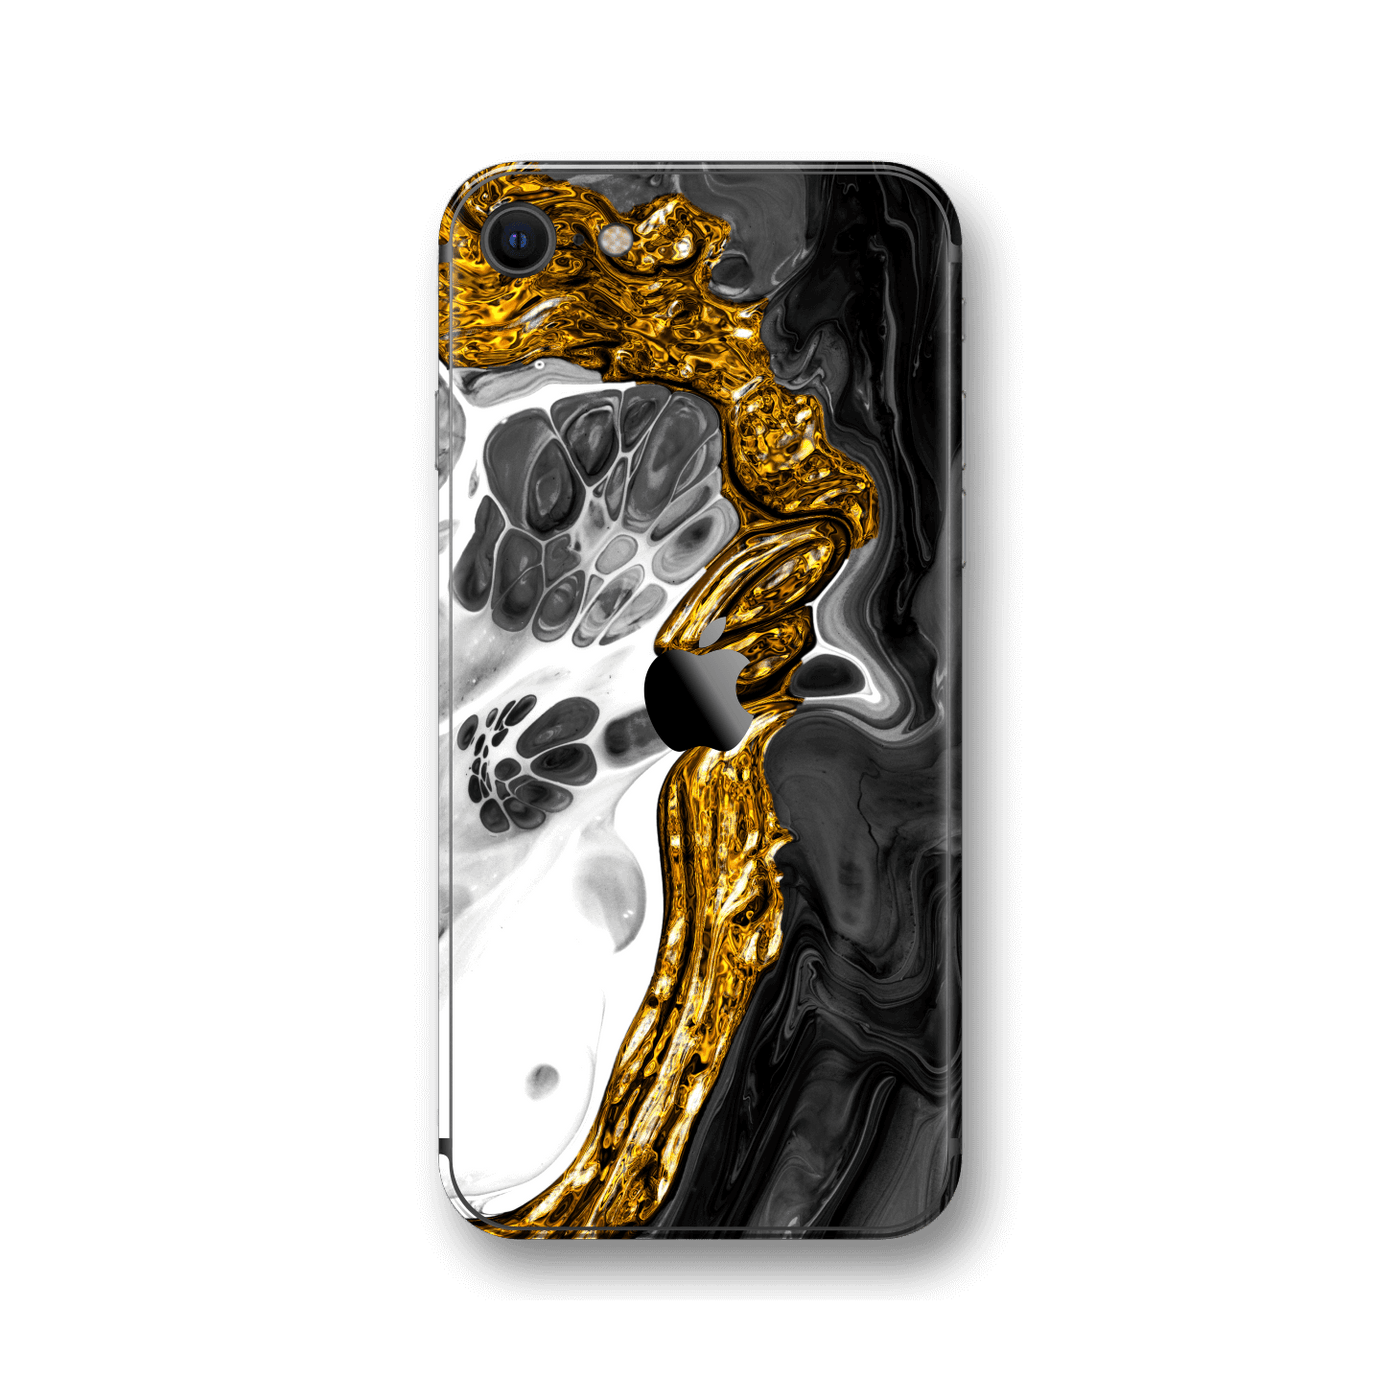 iPhone SE (2020) SIGNATURE Abstract MELTED Gold Skin, Wrap, Decal, Protector, Cover by EasySkinz | EasySkinz.com